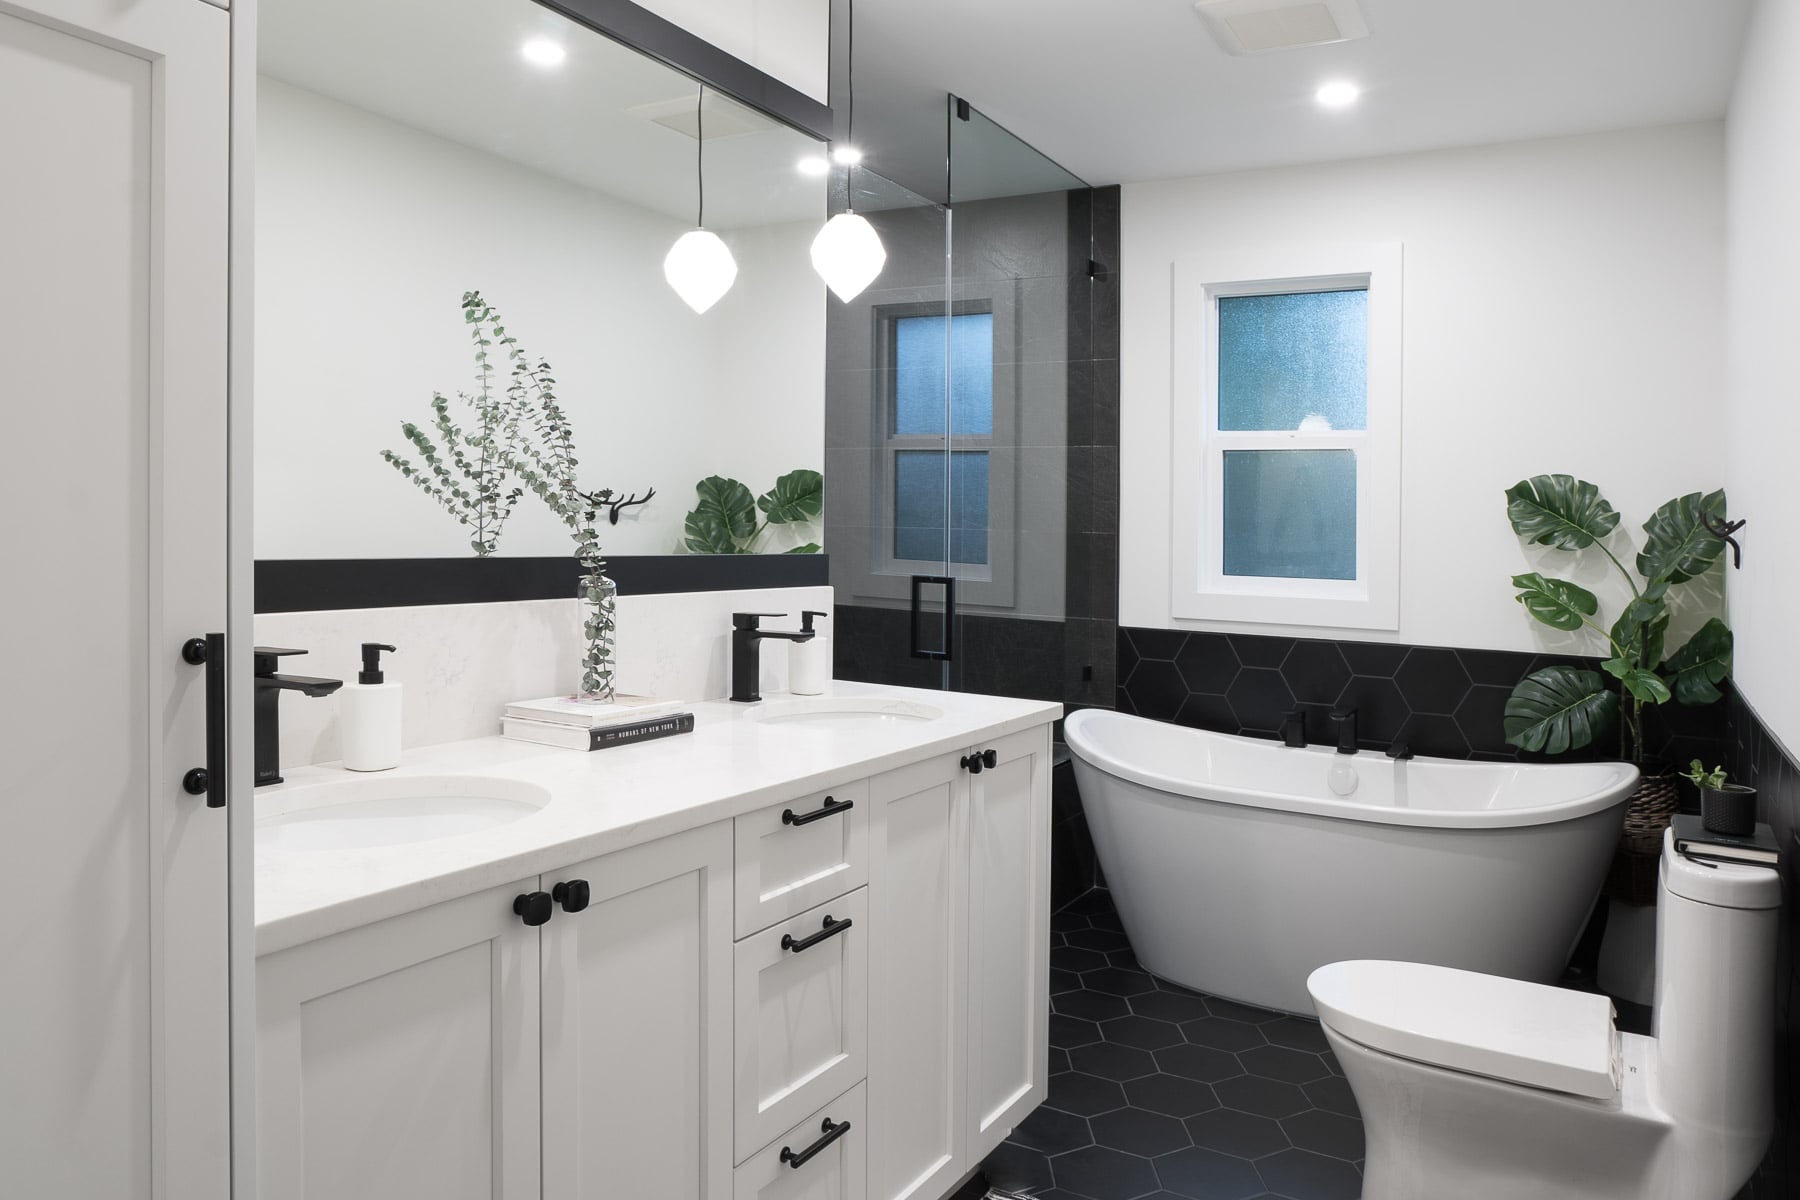 Bathroom with 7 x 8" black matte hex tile on floor and wainscotting; double slipper tub, walk-in shower, pendant lighting, vanity and closet tower.